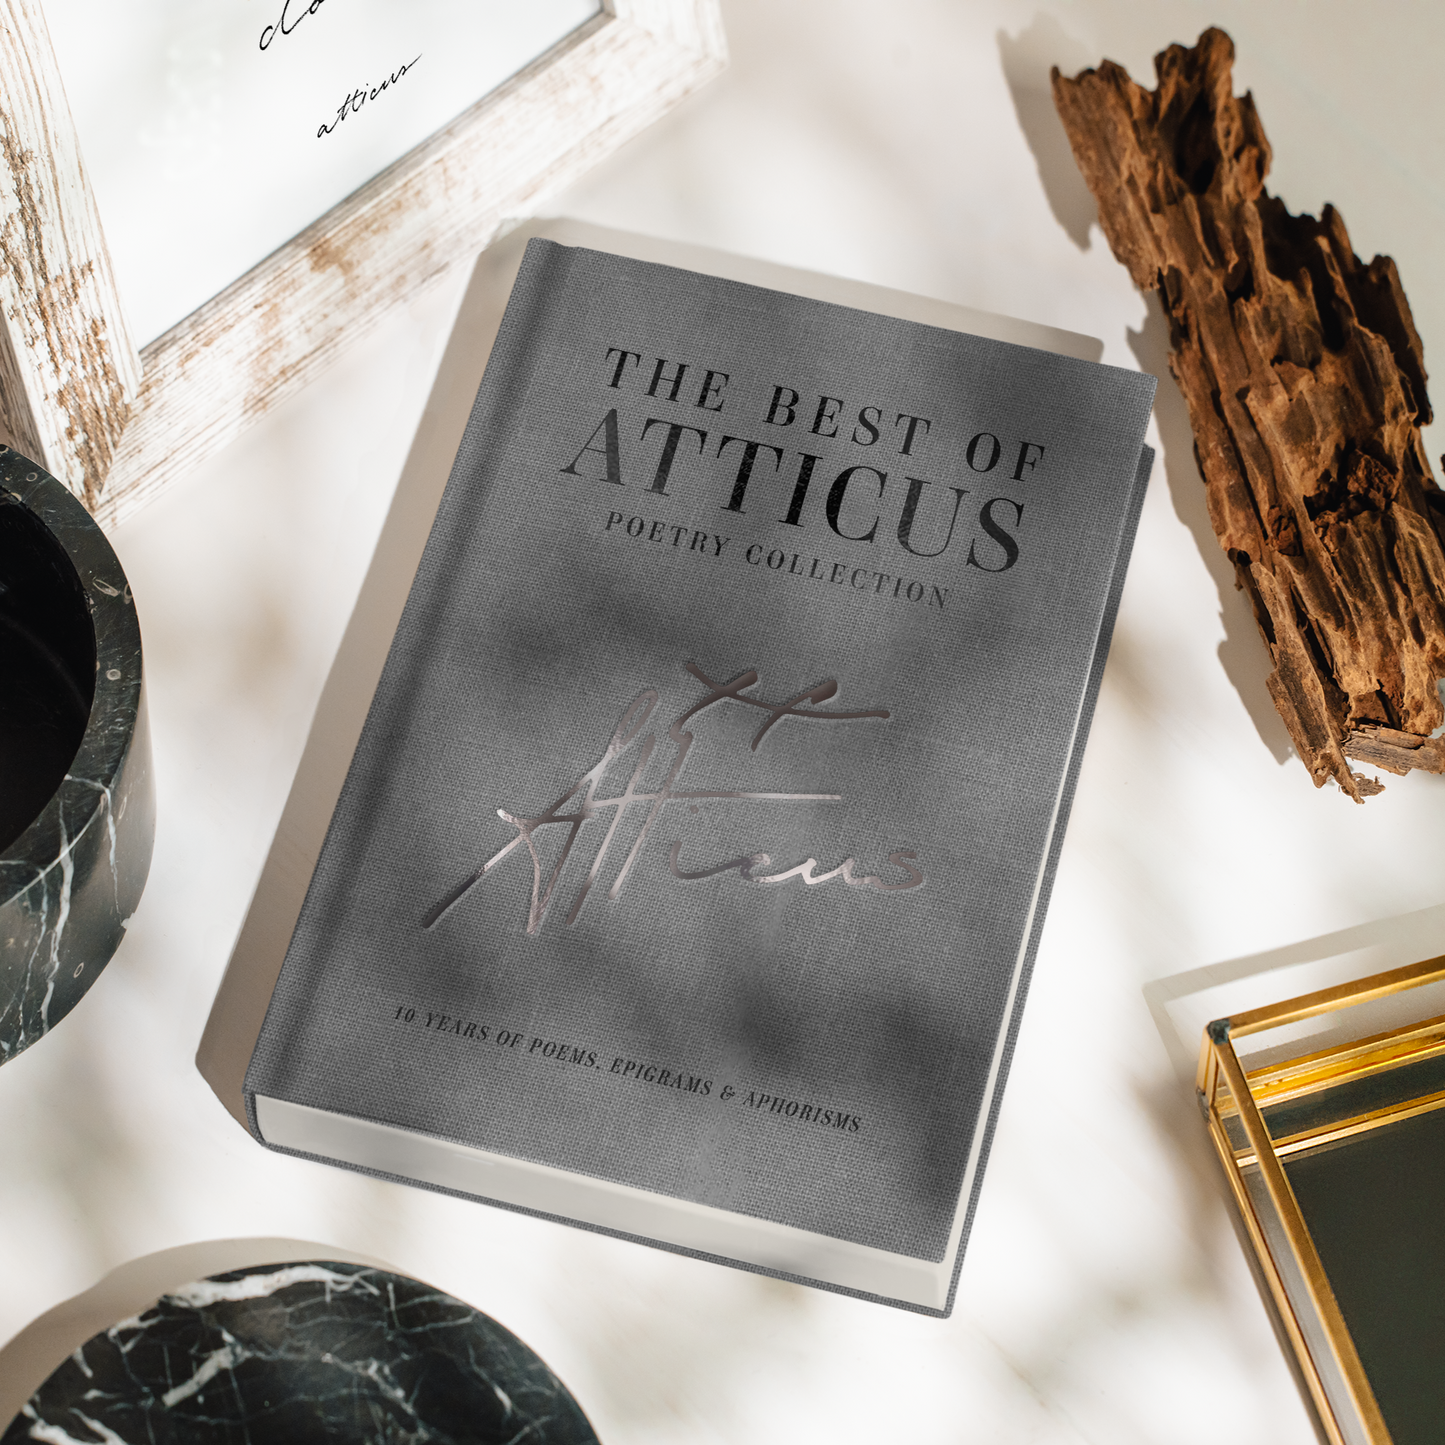 The Best Of Atticus Poetry Collection (Pre-Order)